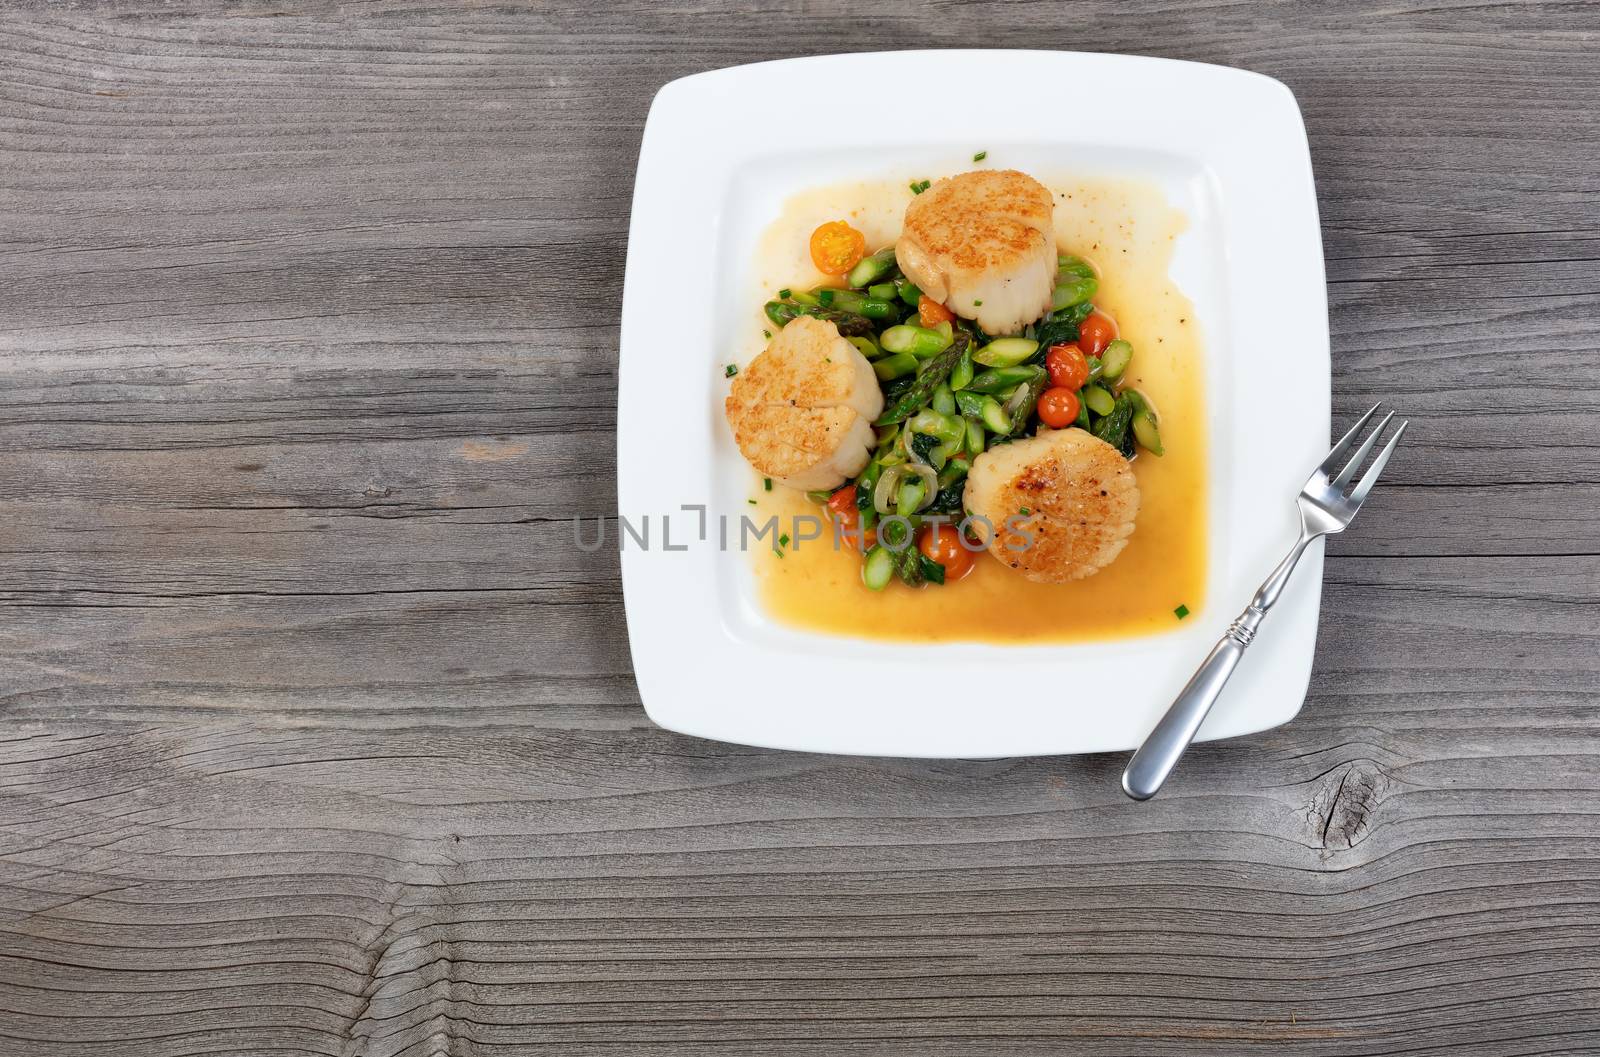 Top view of freshly cooked scallops with vegetables on rustic wooden table 